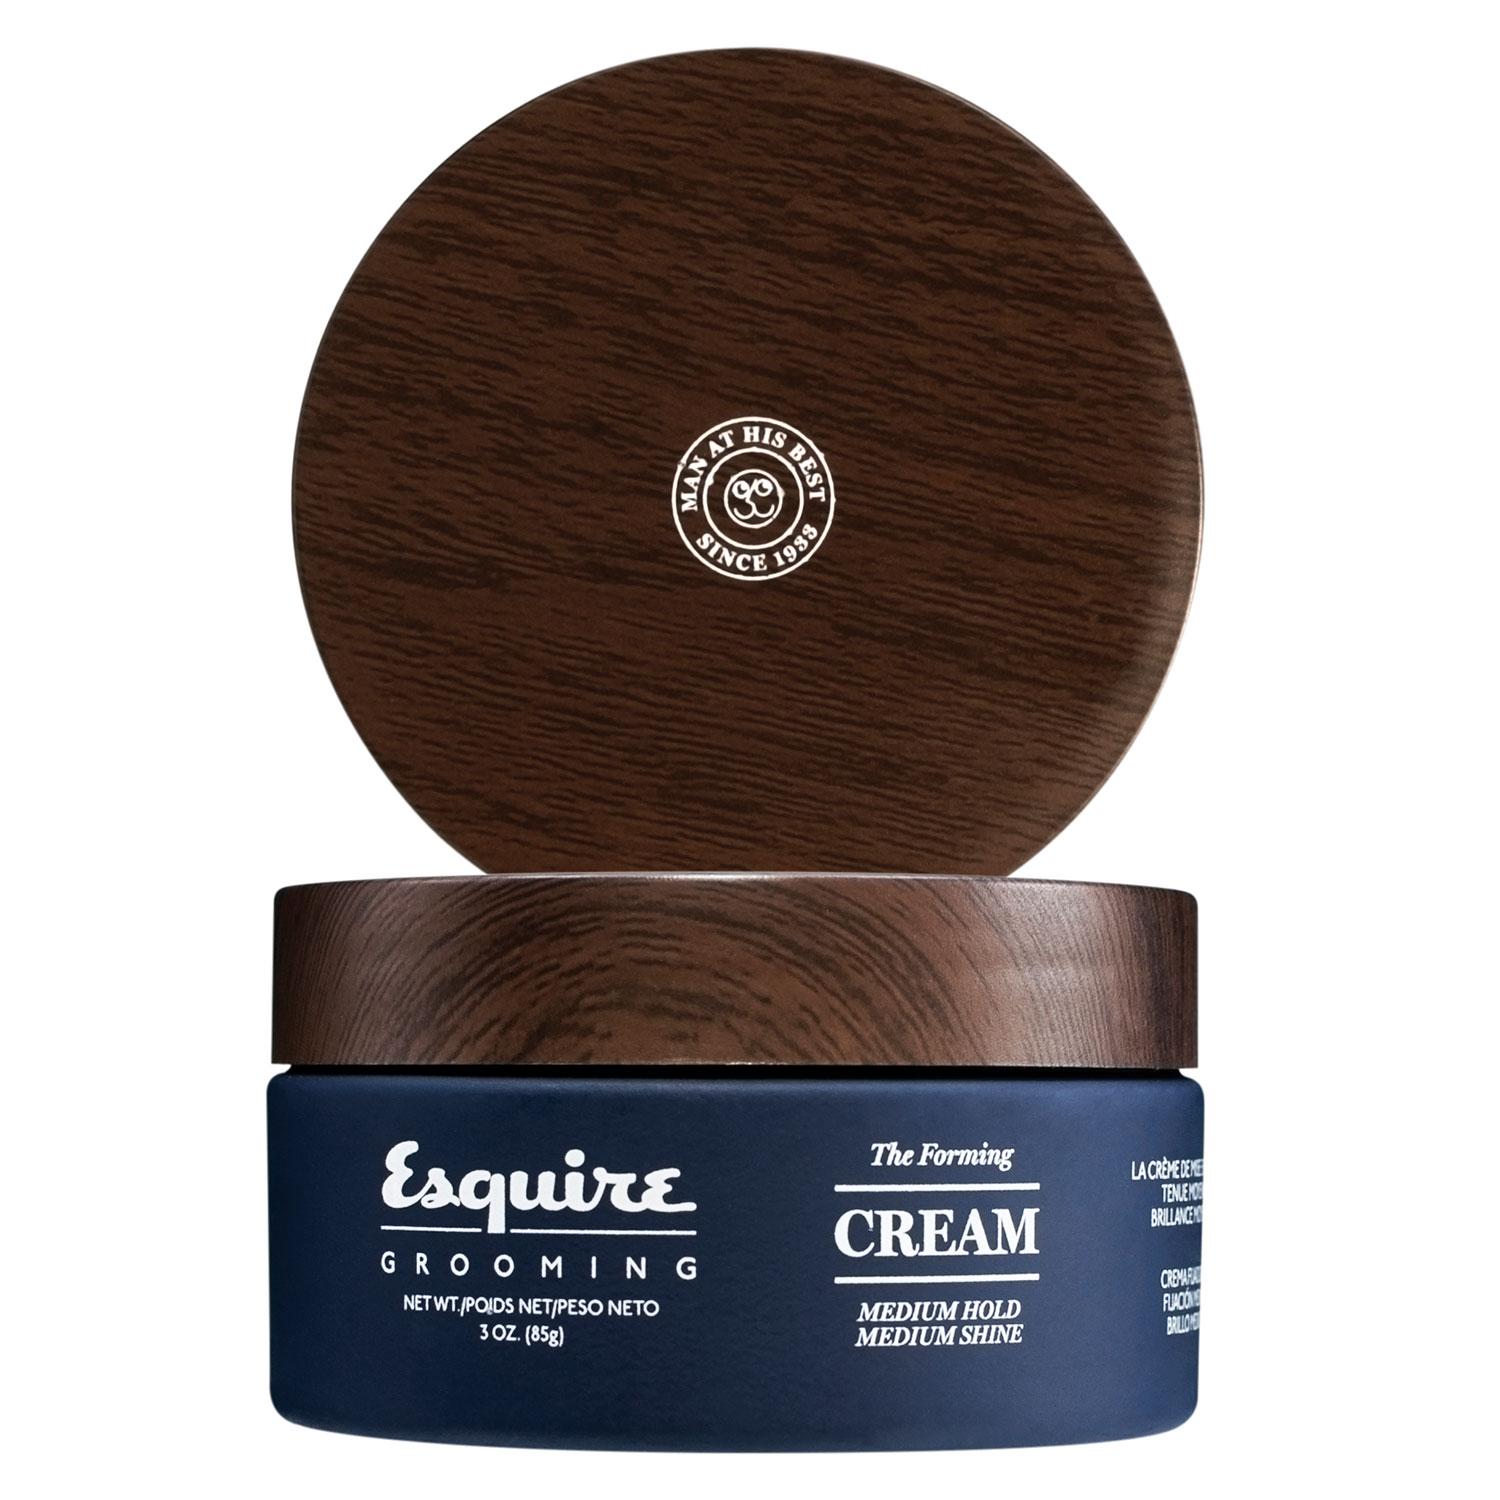 Esquire Styling - The Forming Cream